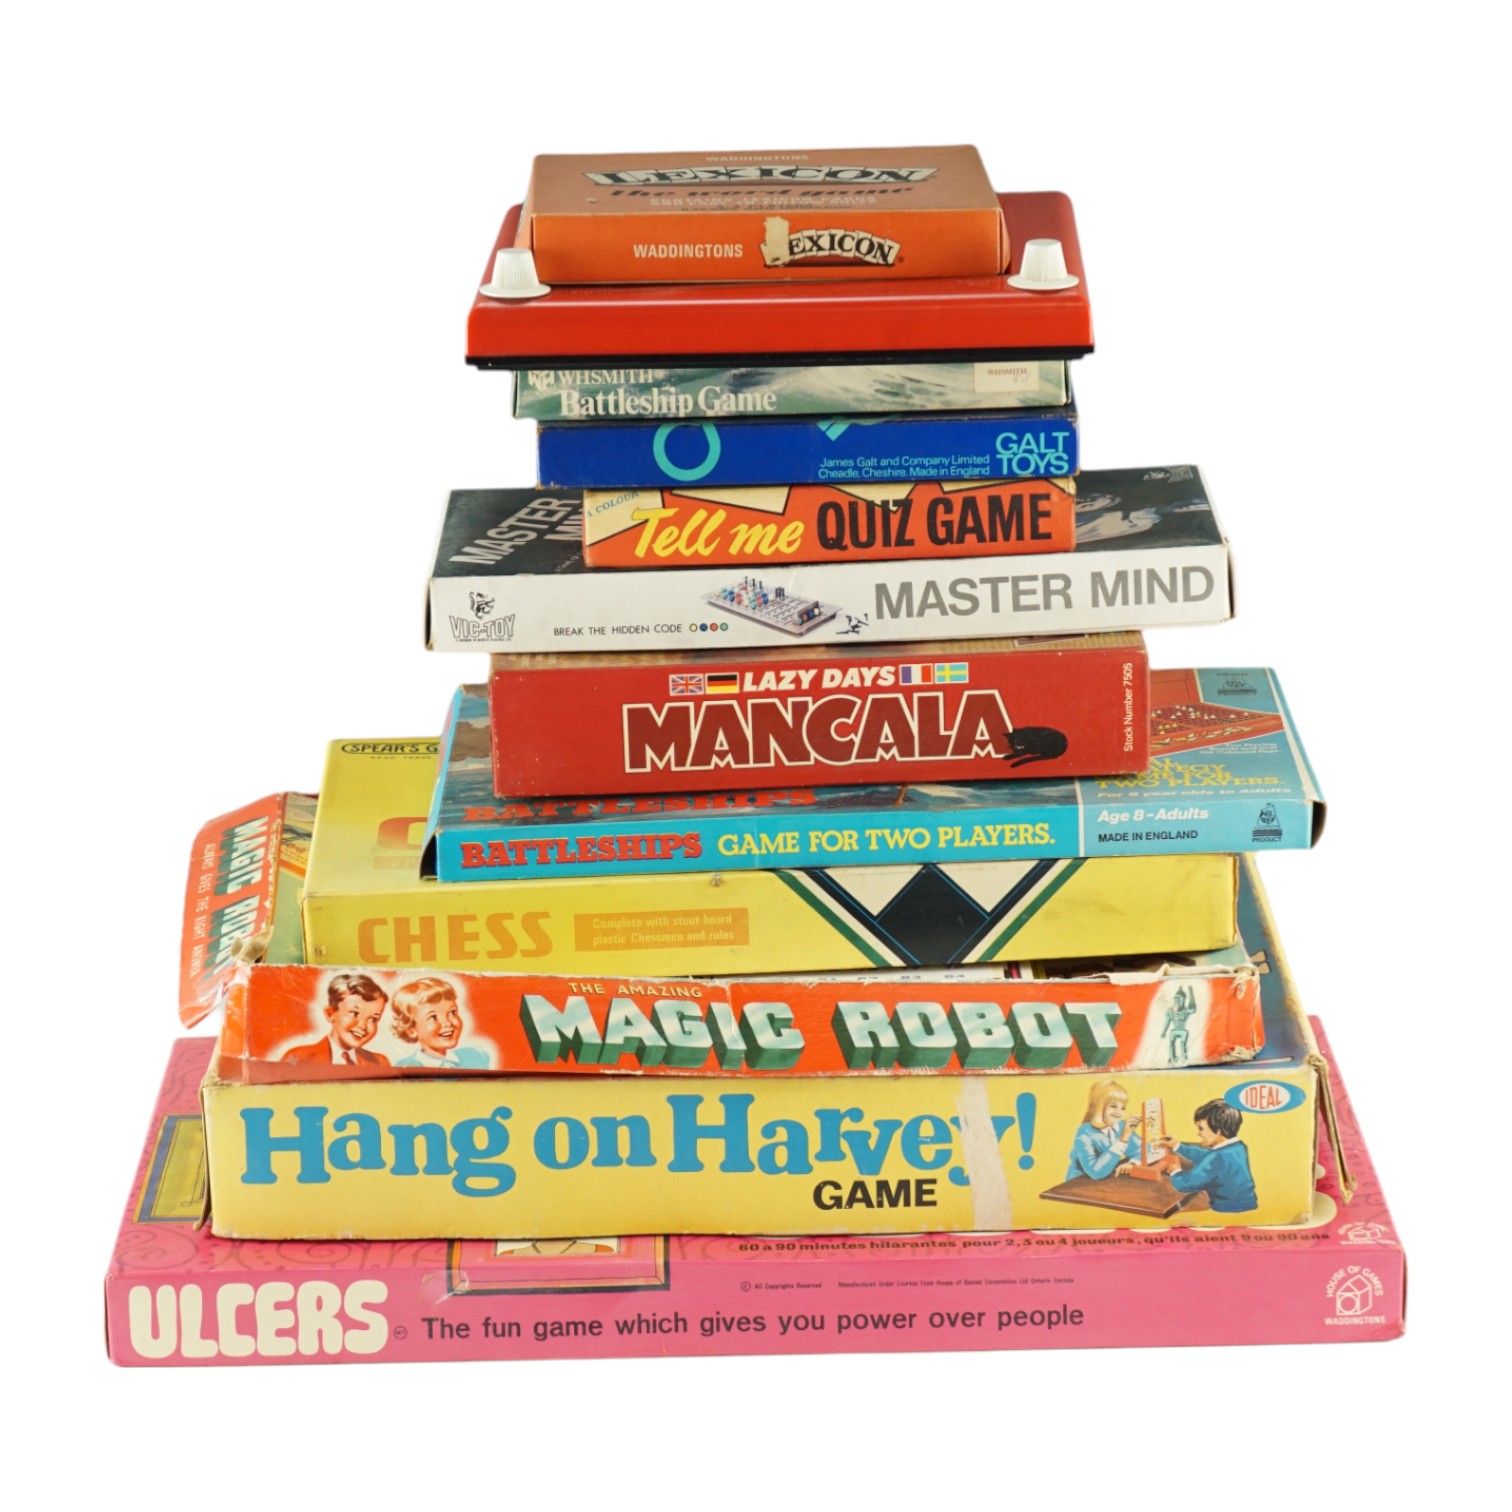 A quantity of vintage games including Magic Robot, Hang on Harvey, Chess, Ulcers, Tell Me, etc